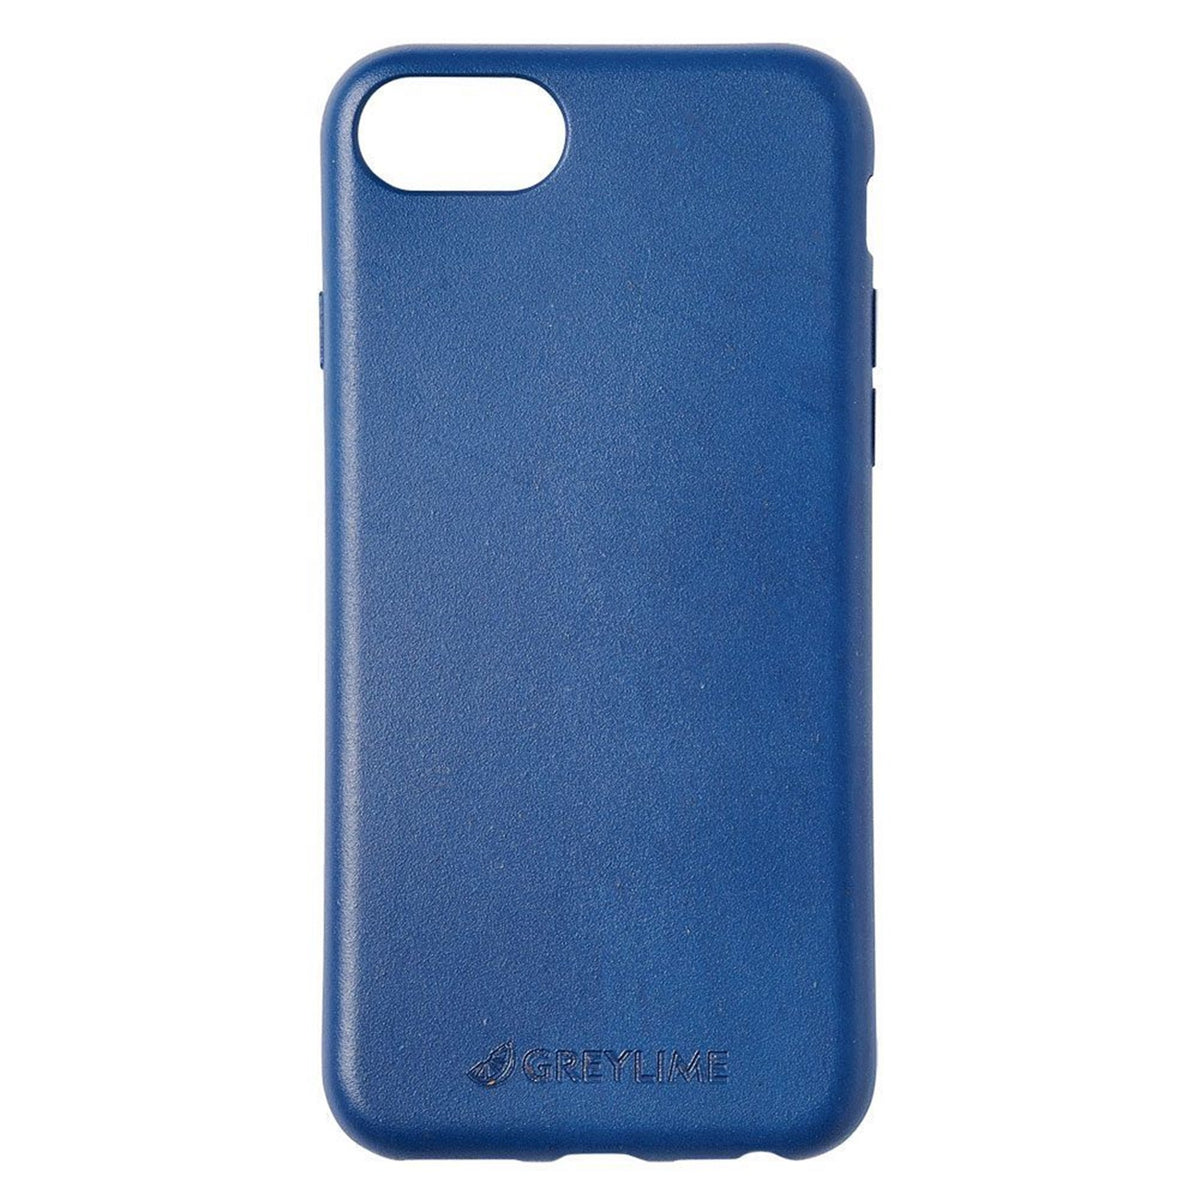 GreyLime-iPhone-6-7-8-Plus-biodegradable-cover-Navy-blue-COIP678P03-V4.jpg